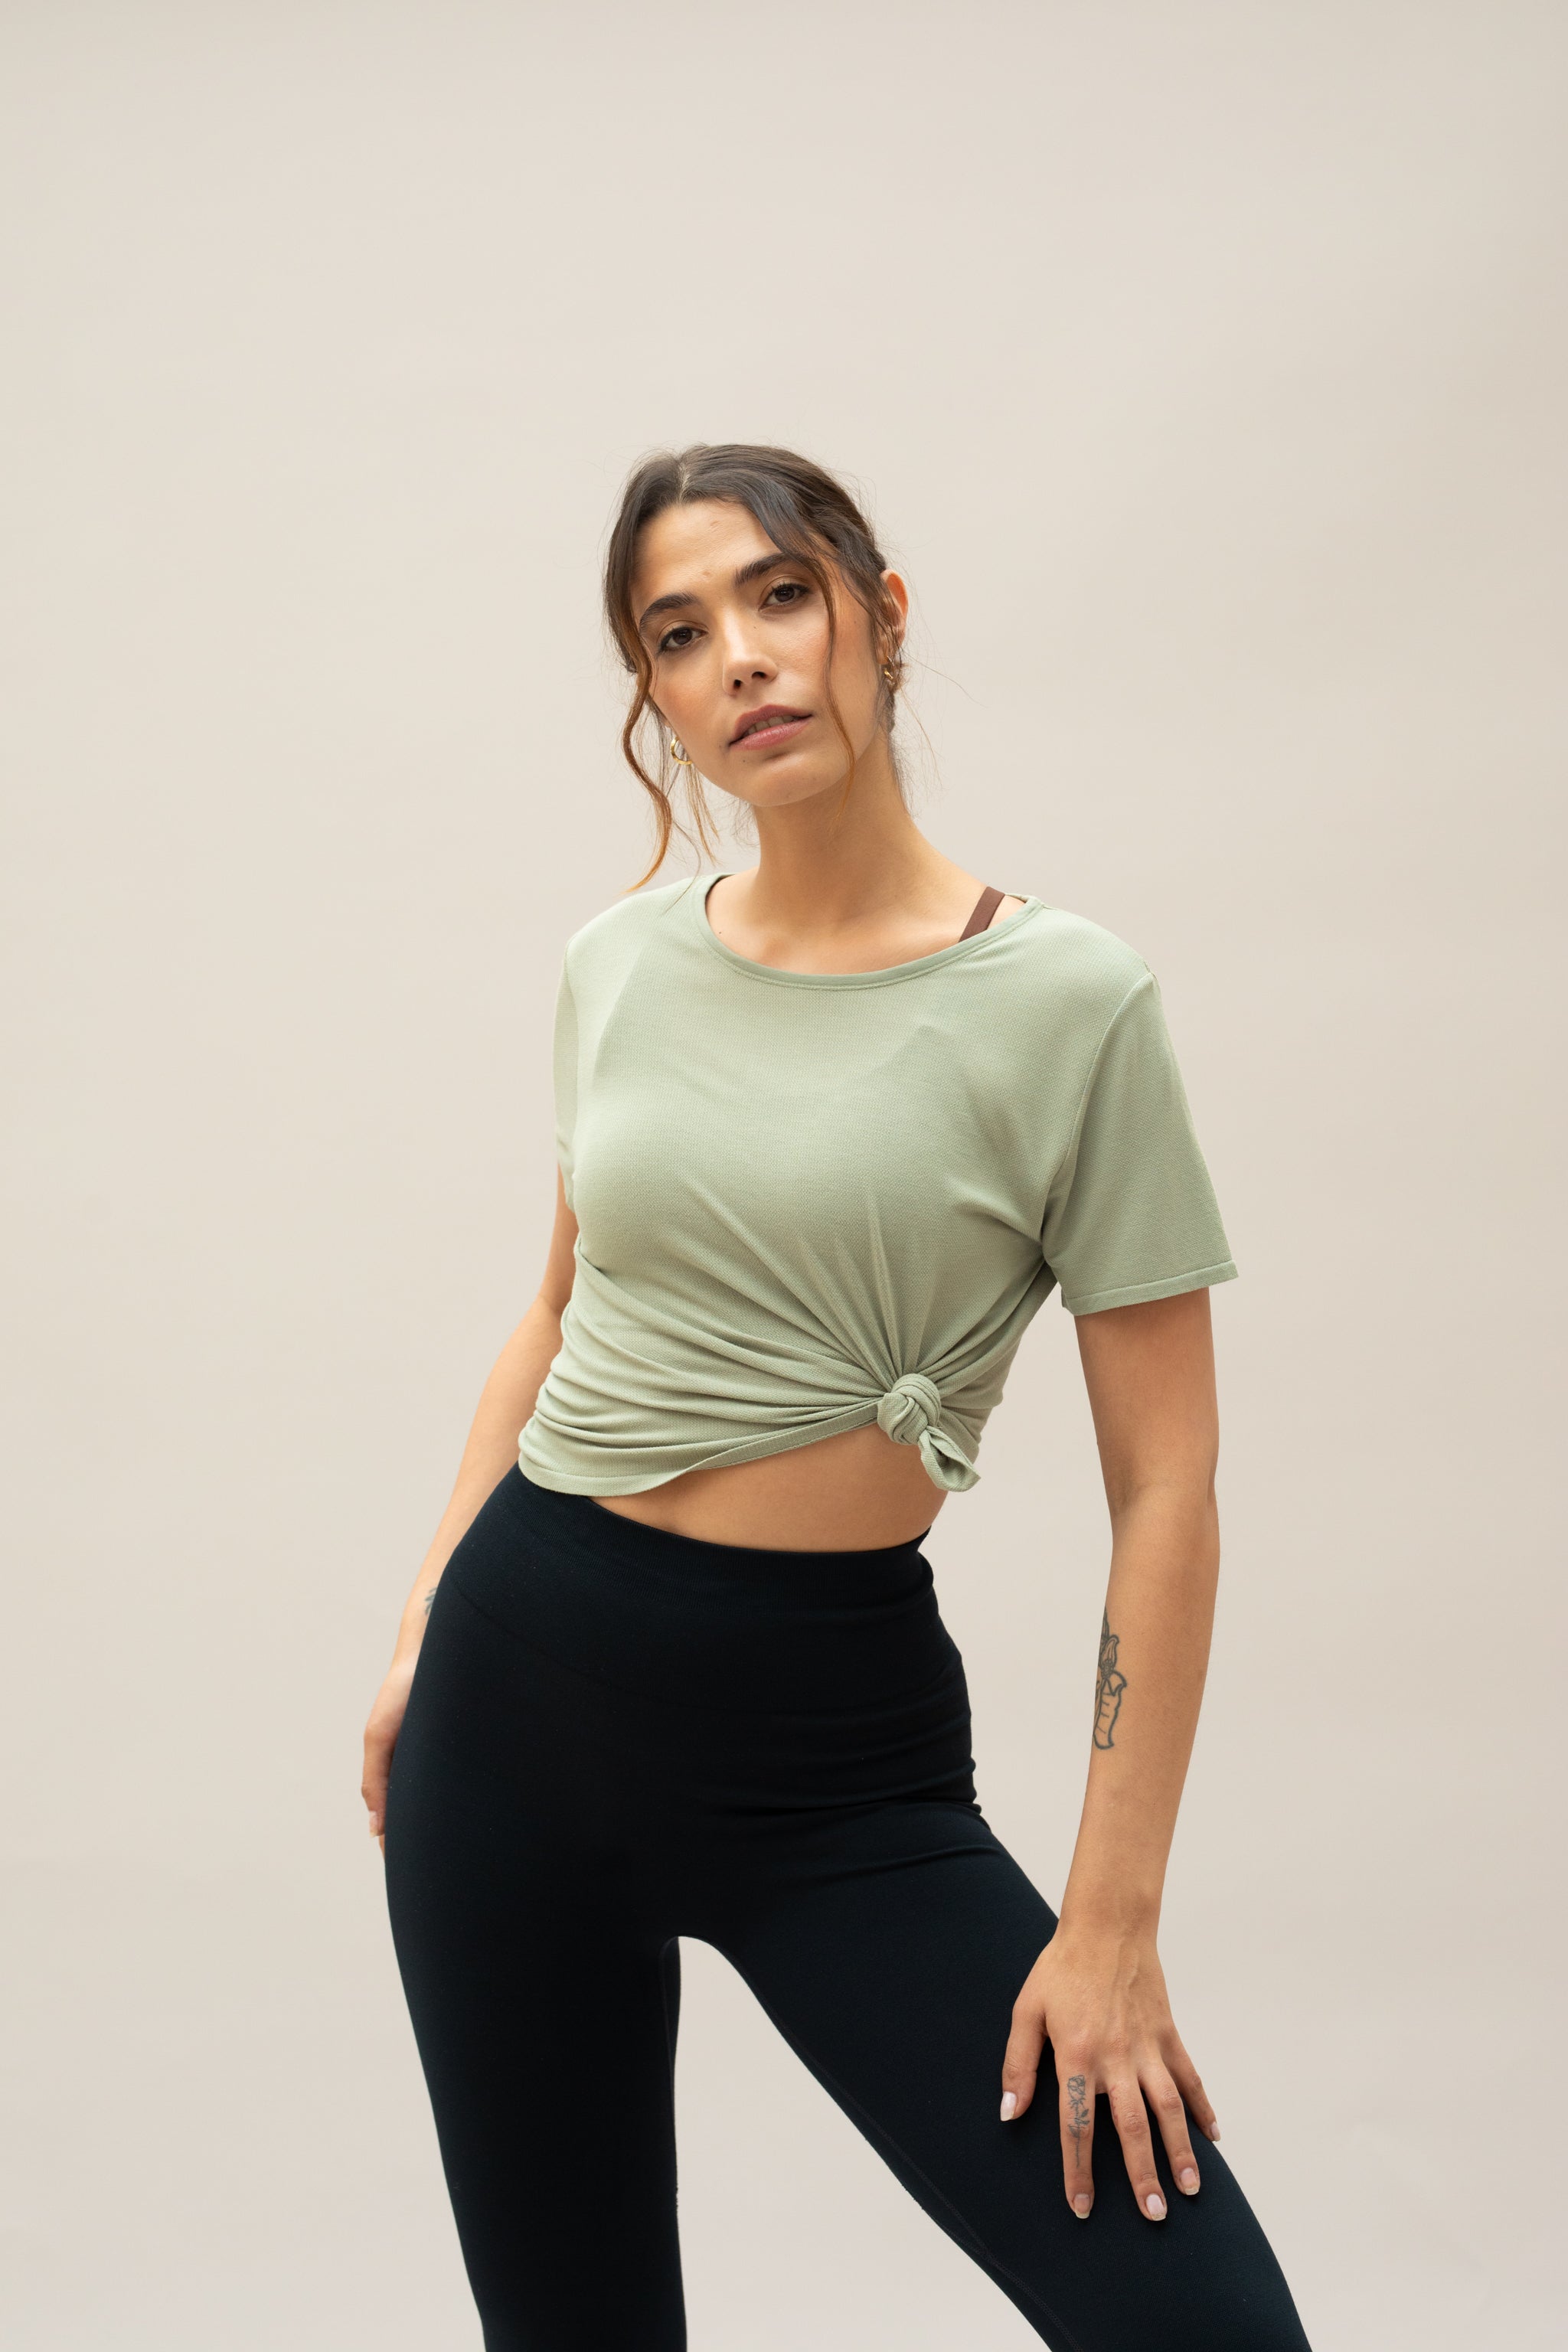 Model wearing green t-shirt for sustainable activewear brand, Jilla